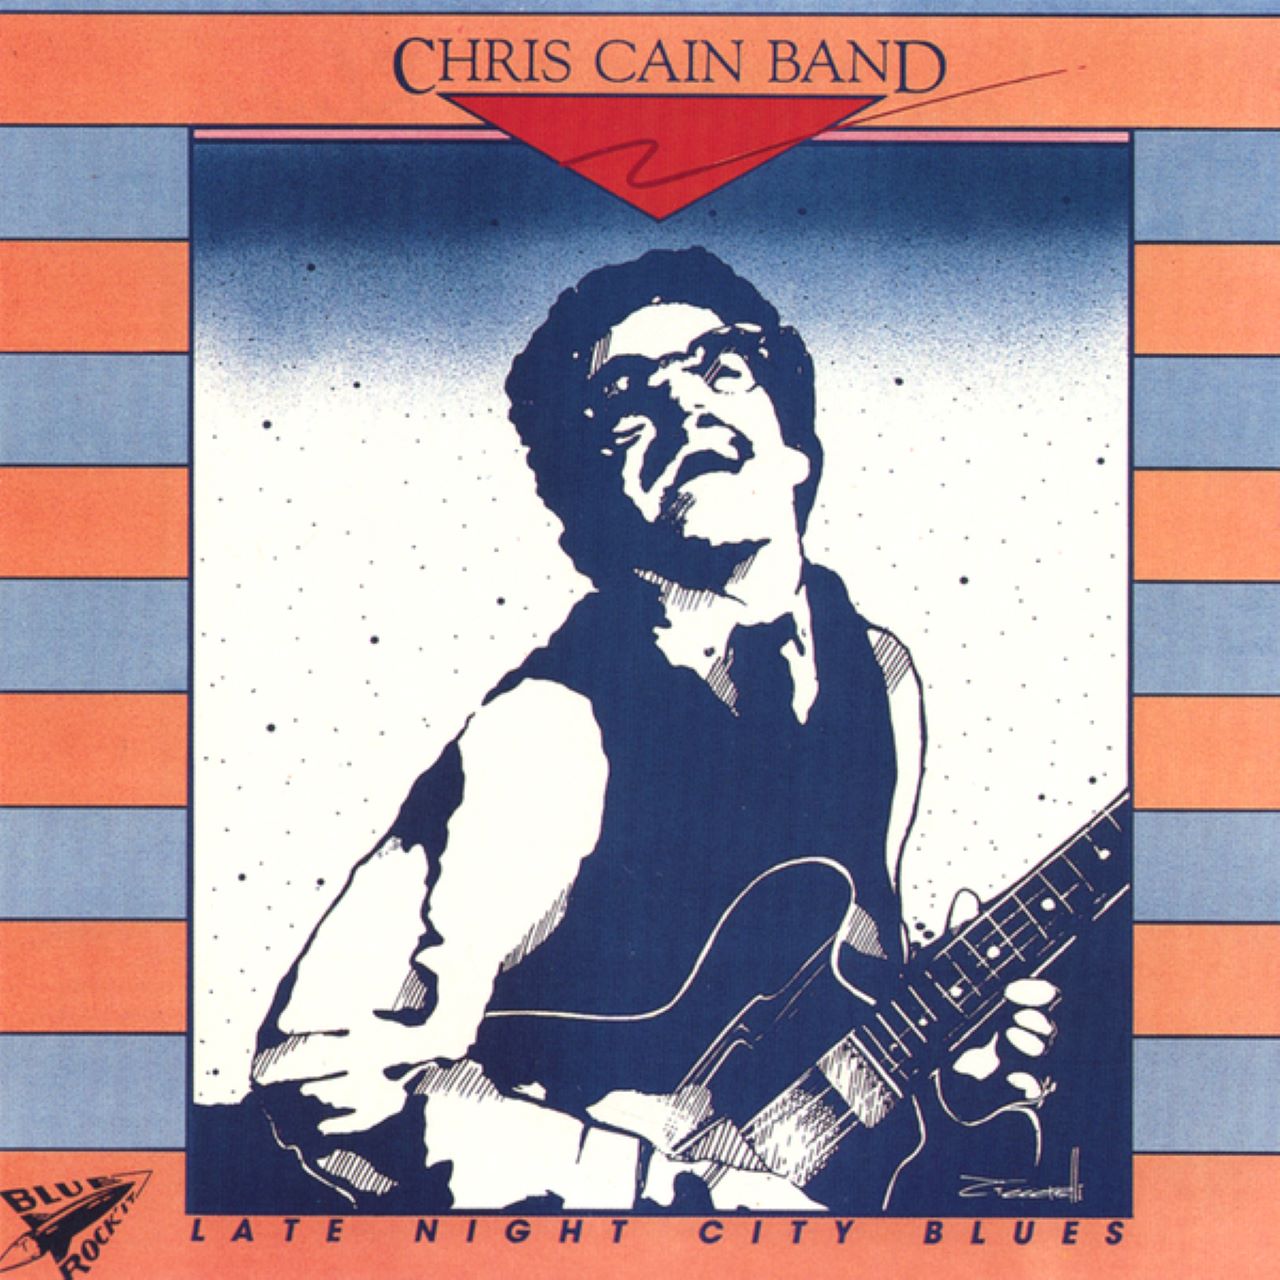 Chris Cain Band – Late Night City Blues cover album